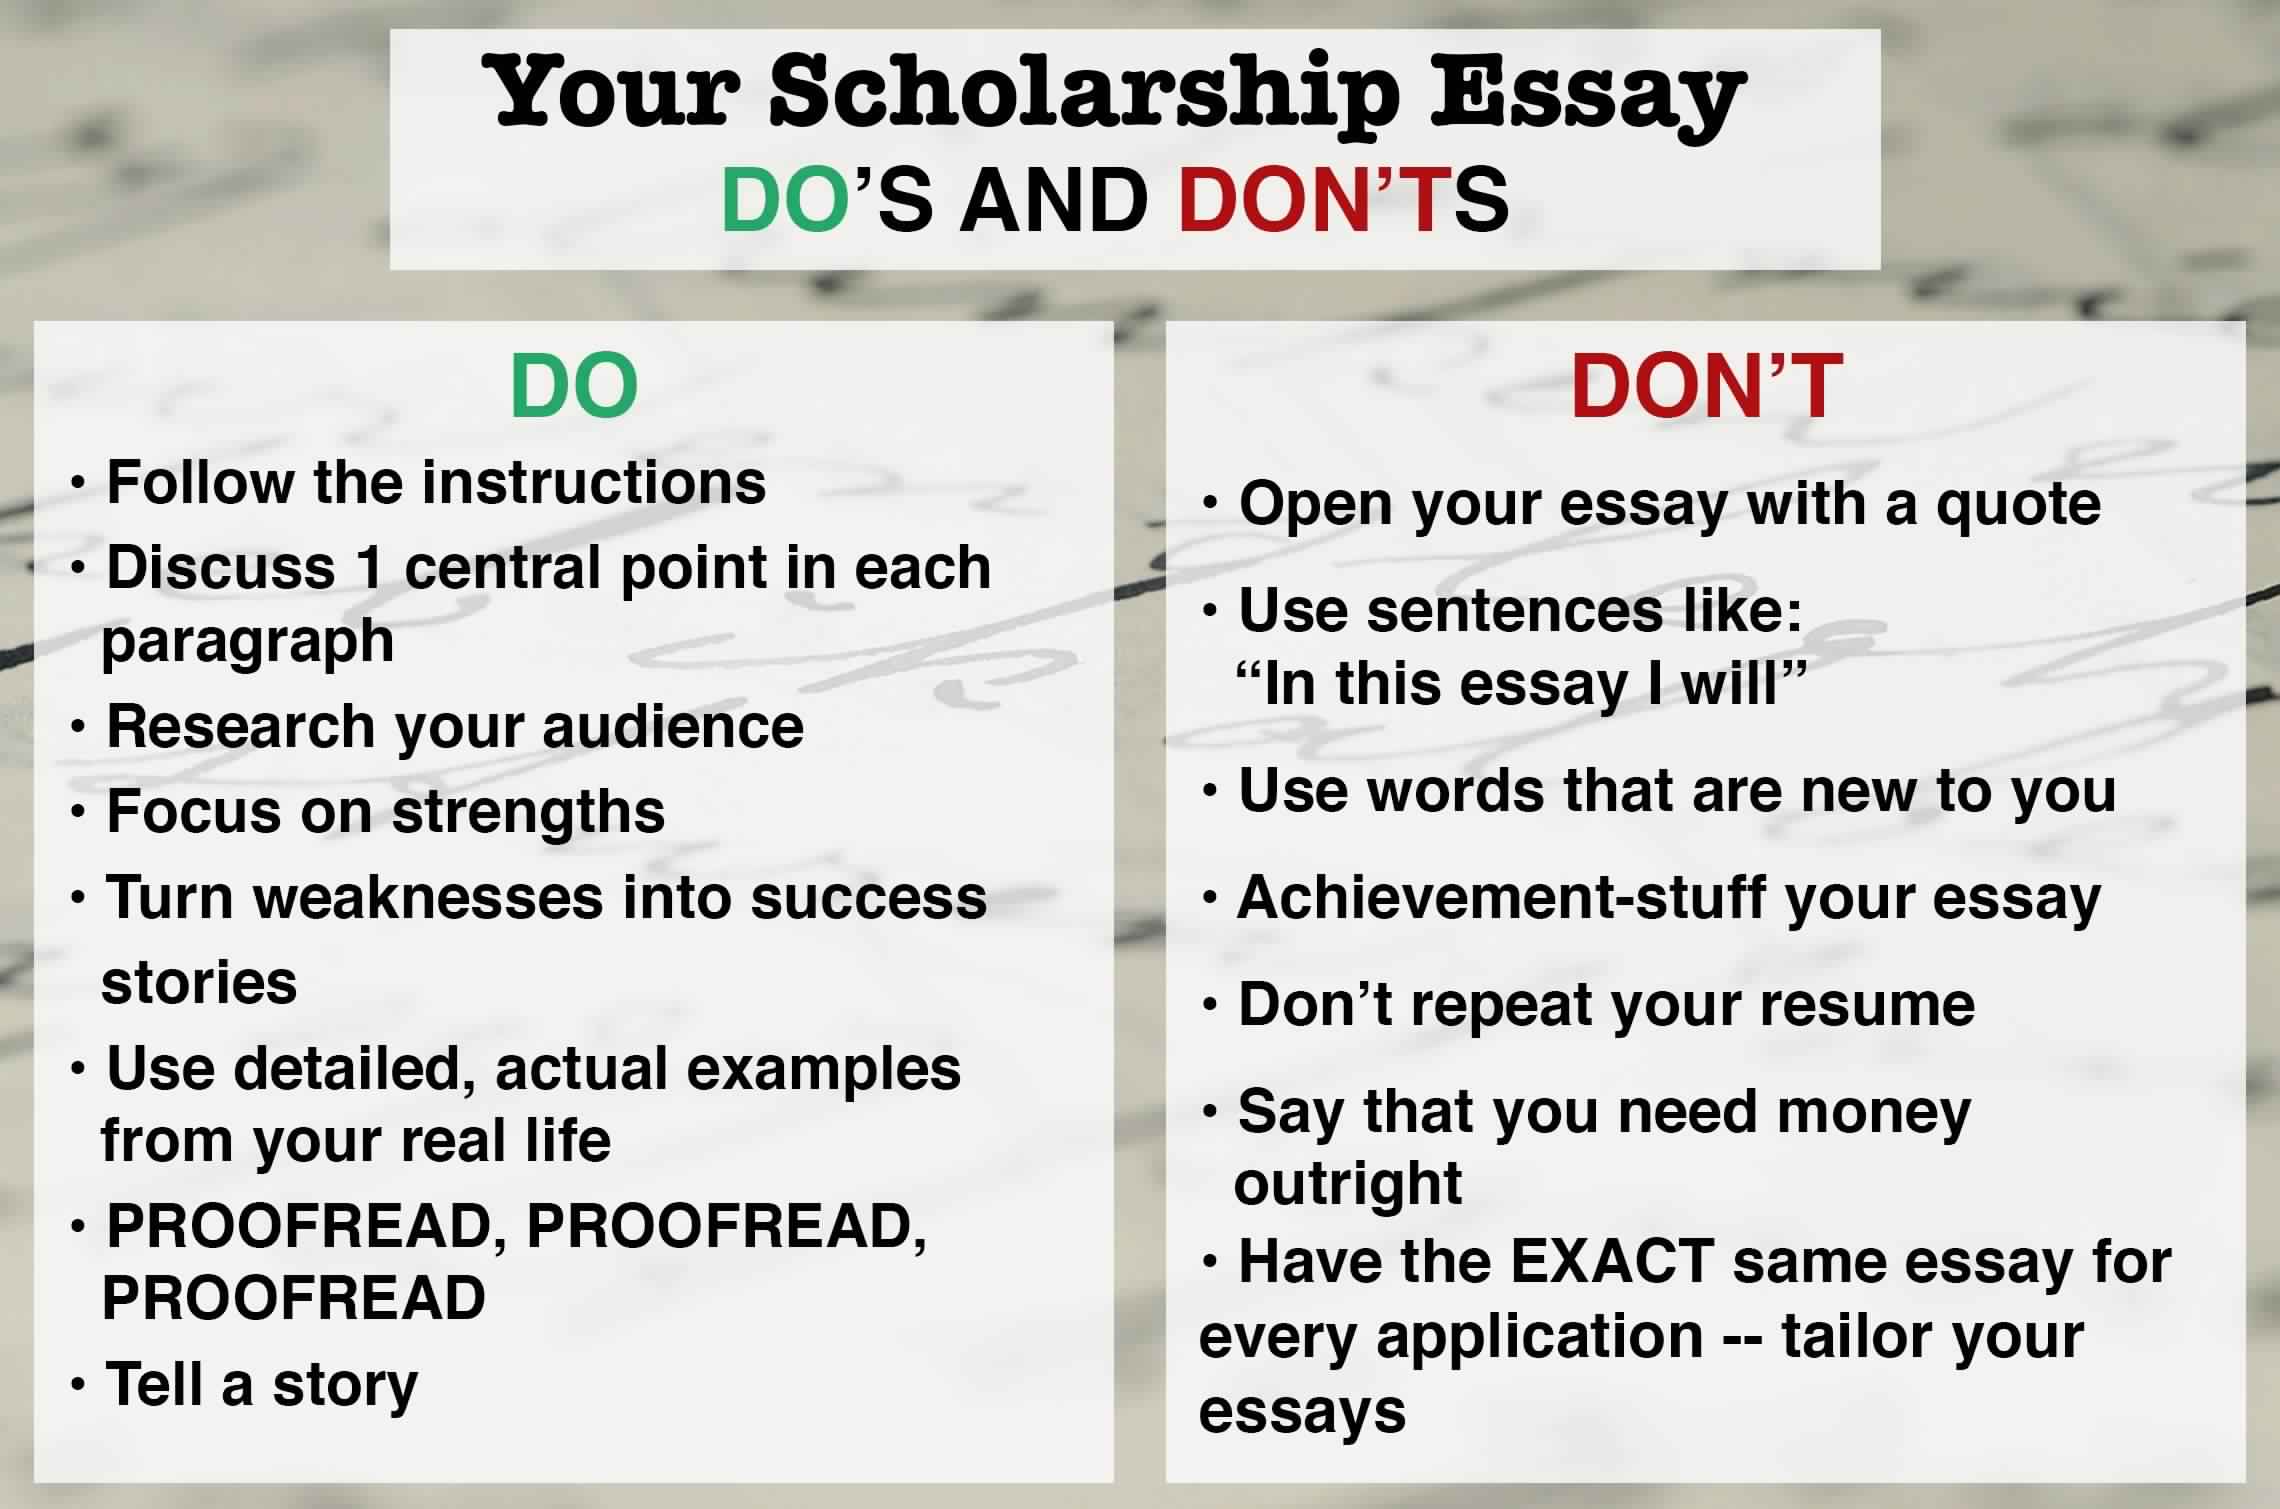 How Should Students Write Scholarship Essay